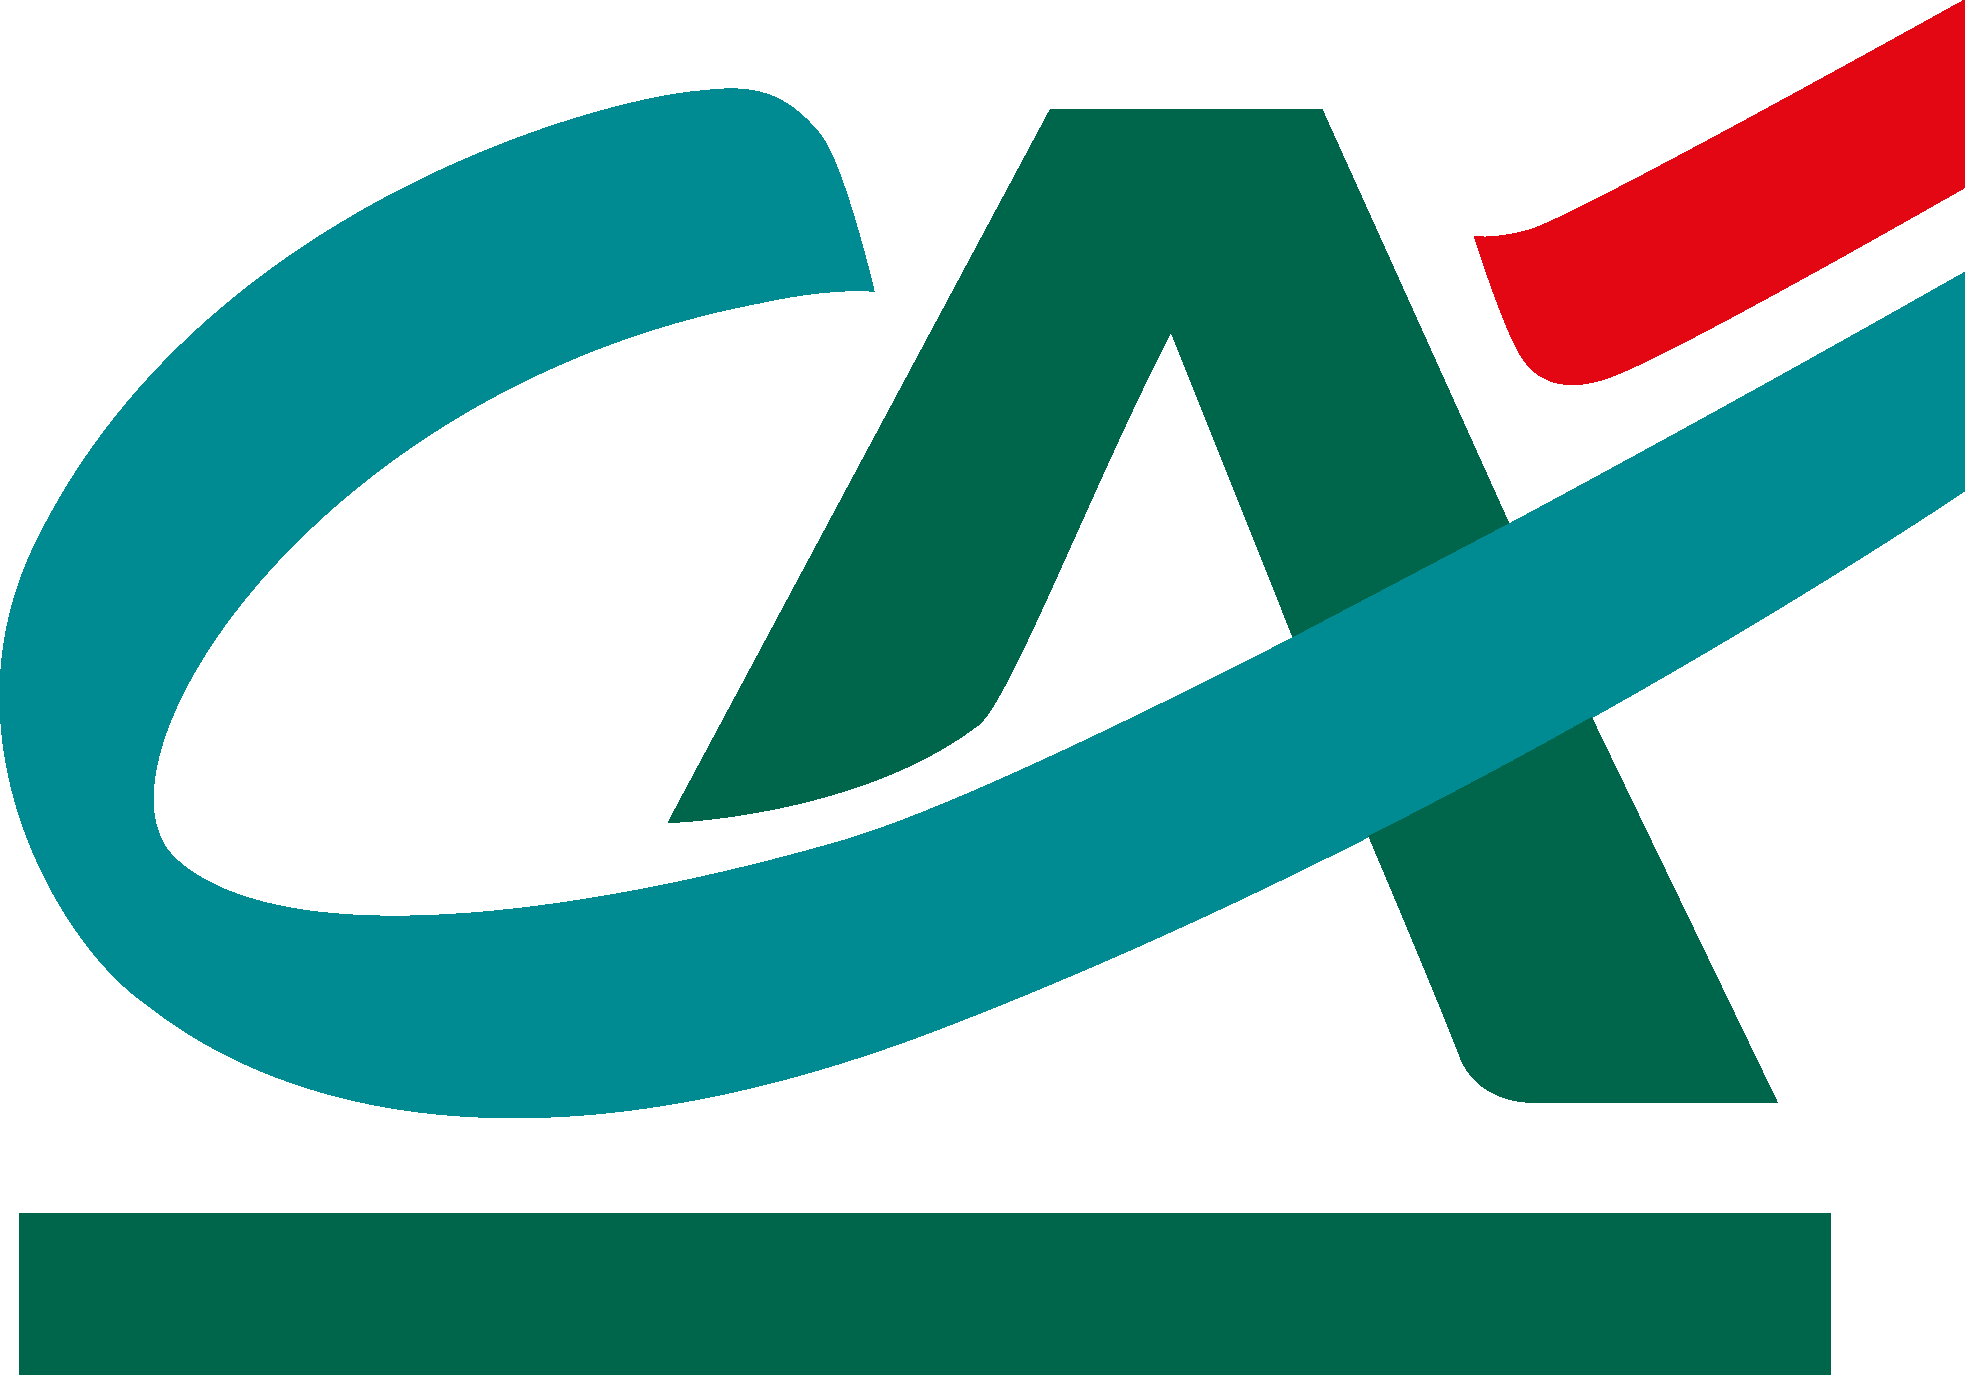 Credit Agricole Logo png